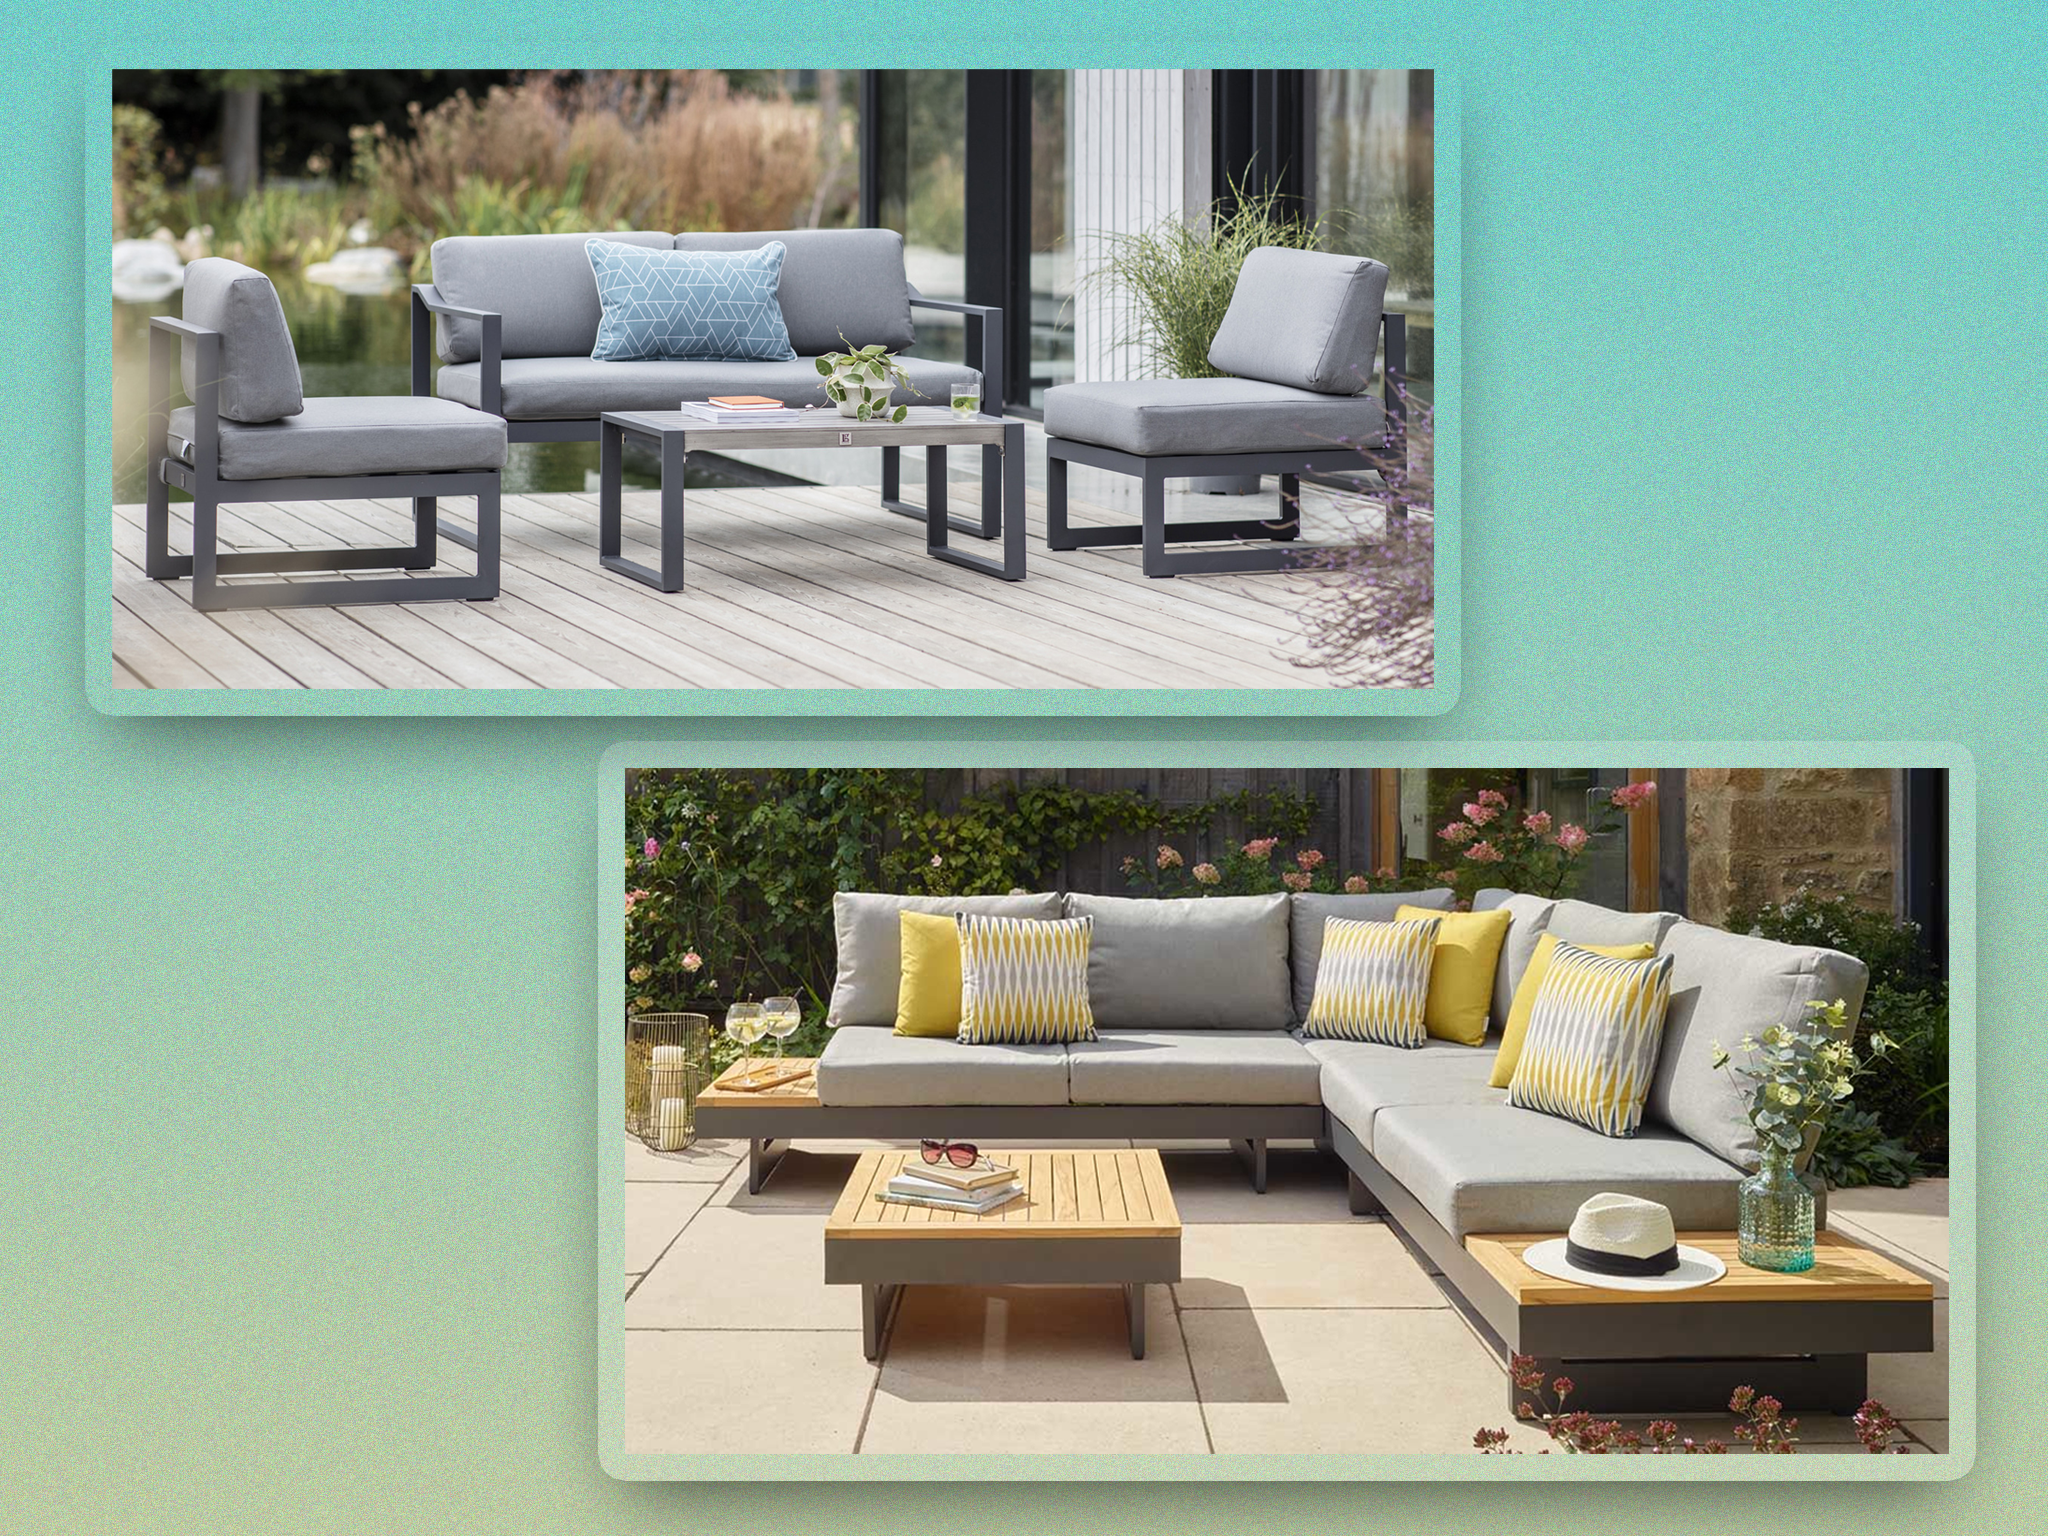 Some settees are packable and compact for fitting into smaller gardens and balconies